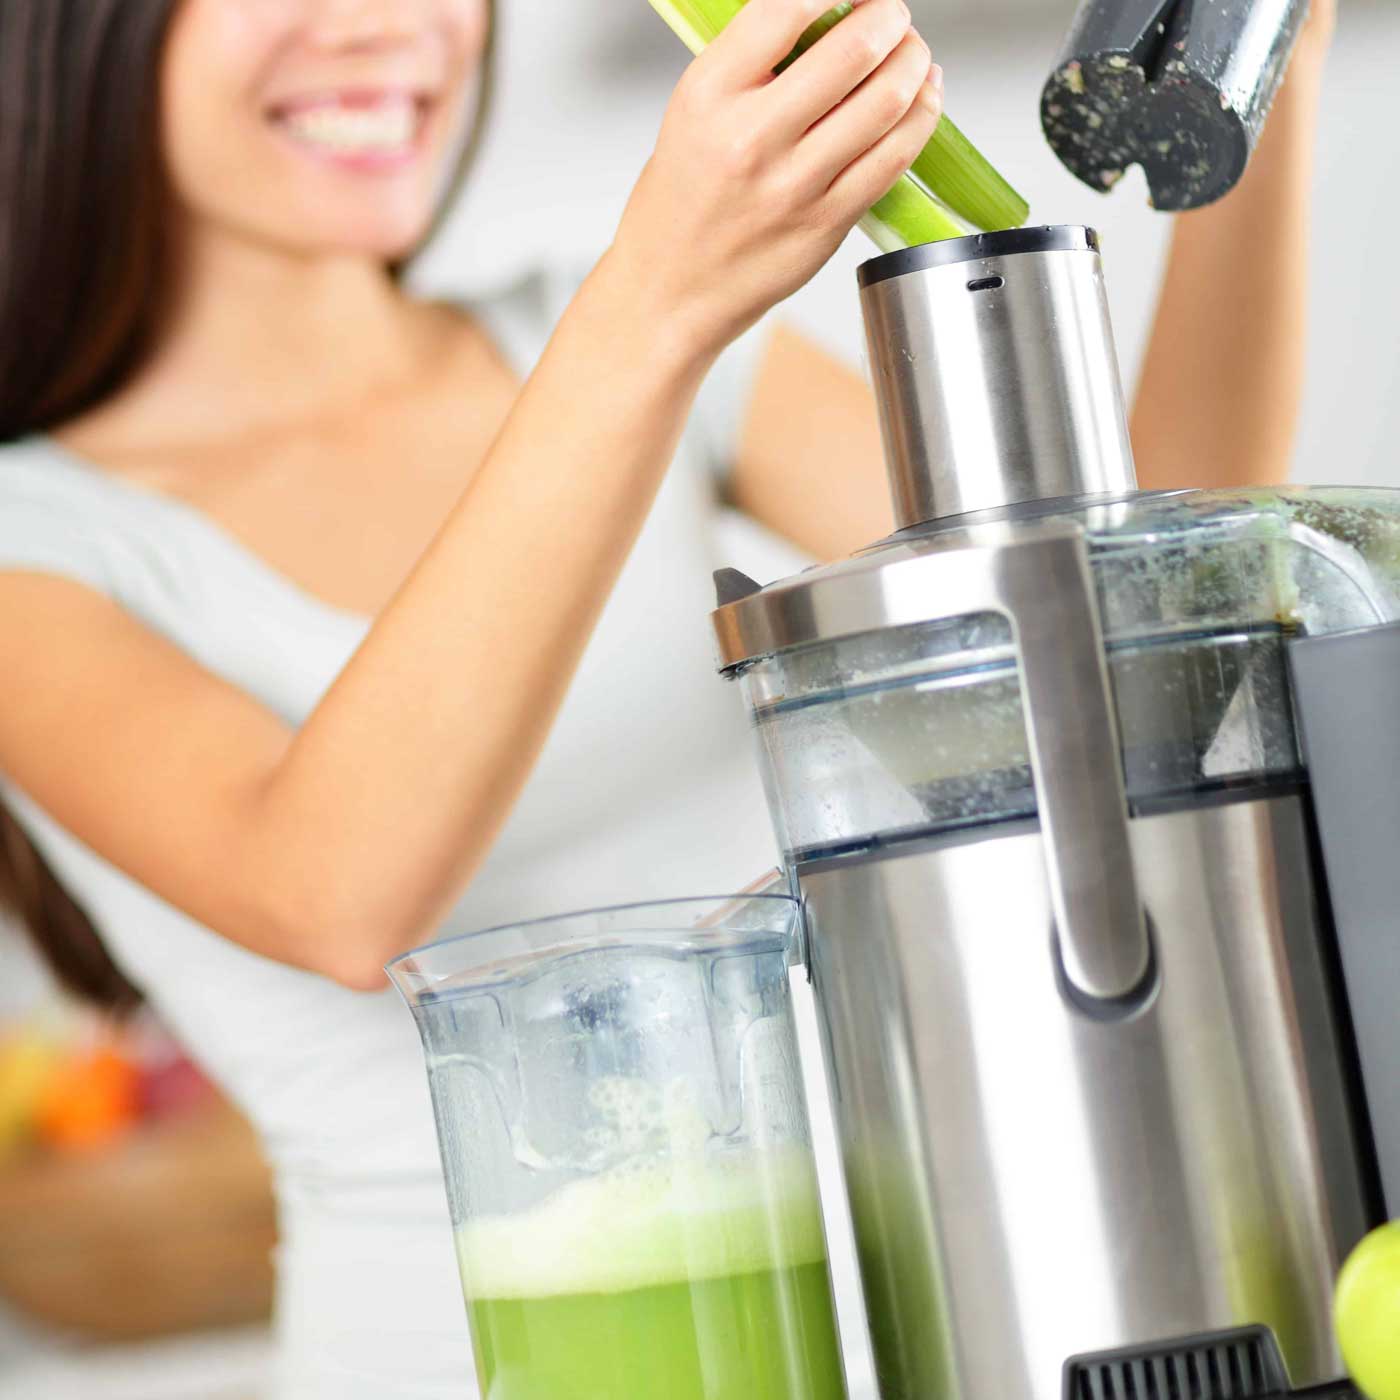 Essential Chiropractic and Healthcare Clinic - Detox and Weight Management Program Girl Doing Juice